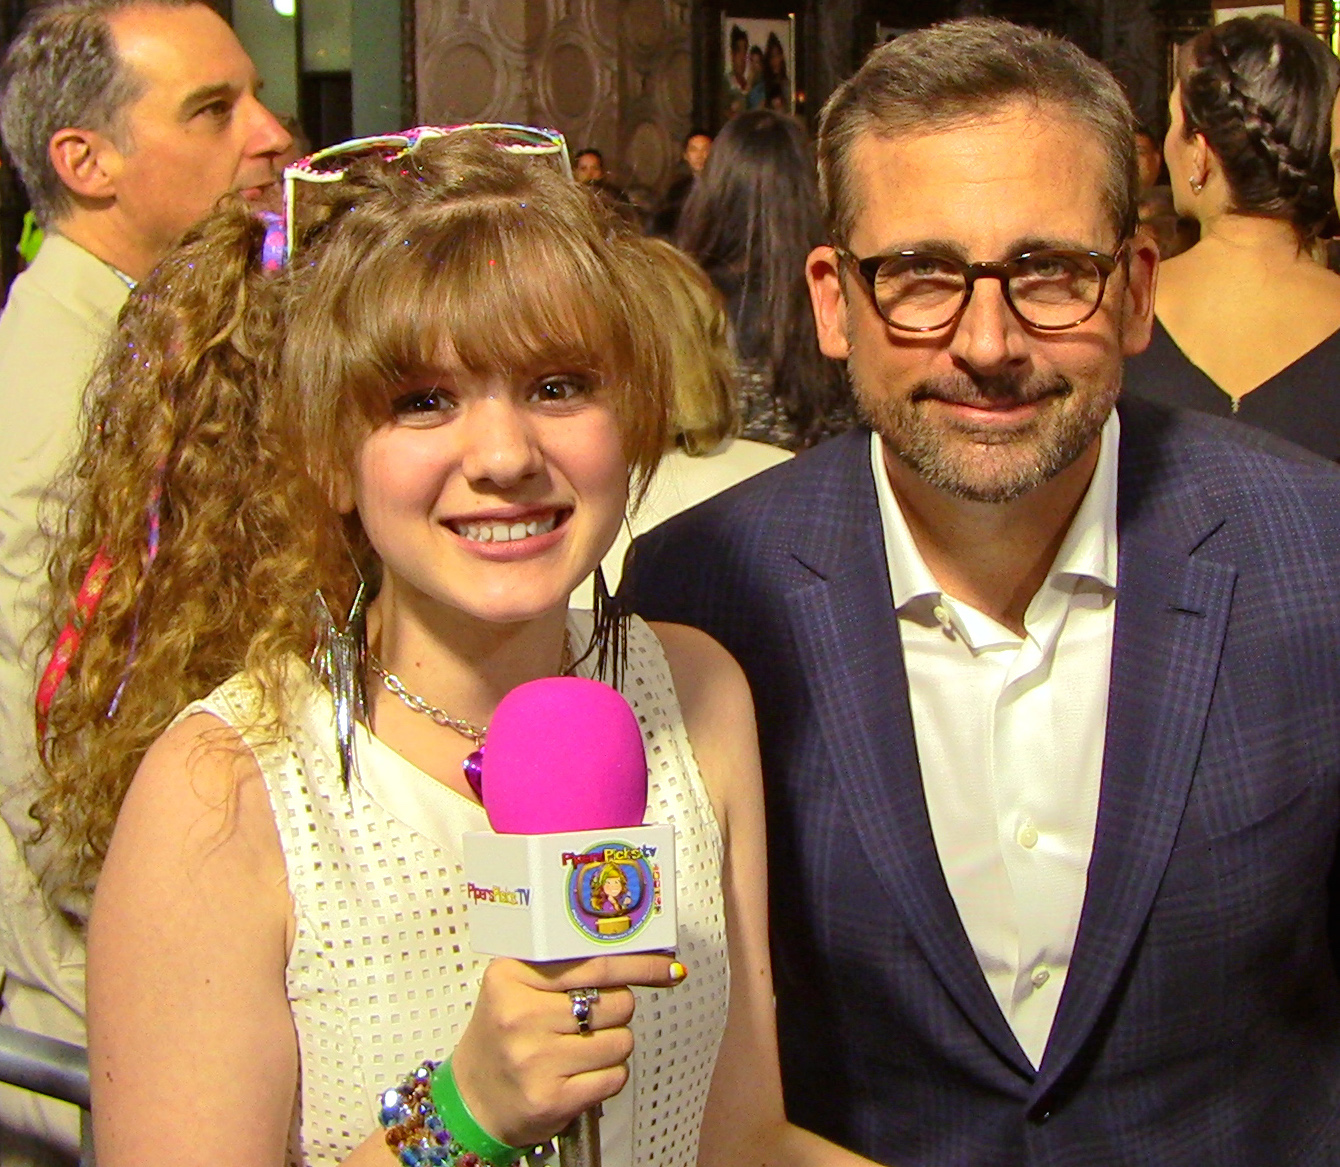 Piper Reese interviewing Steve Carell at the premiere for Disney's Alexander and the Terrible, Horrible, No Good, Very Bad Day